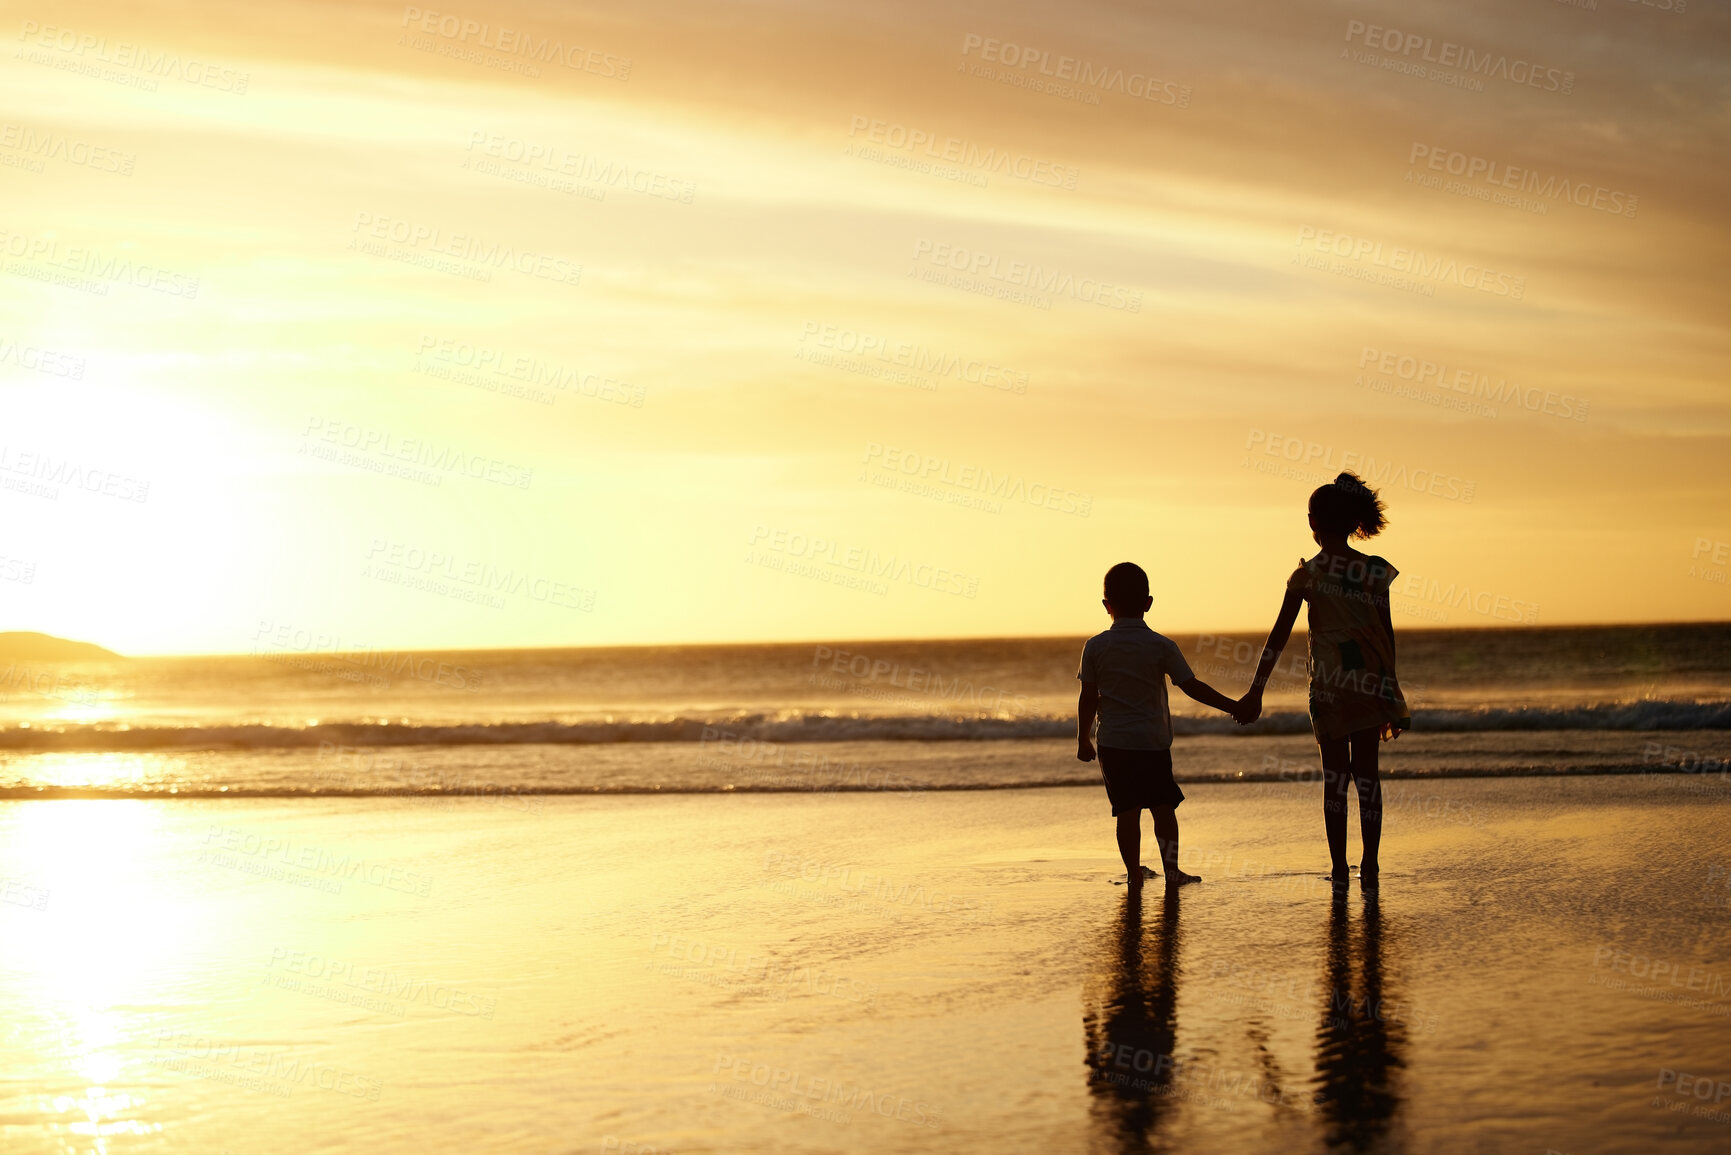 Buy stock photo Shot of an adorable brother and sister bonding at the beach